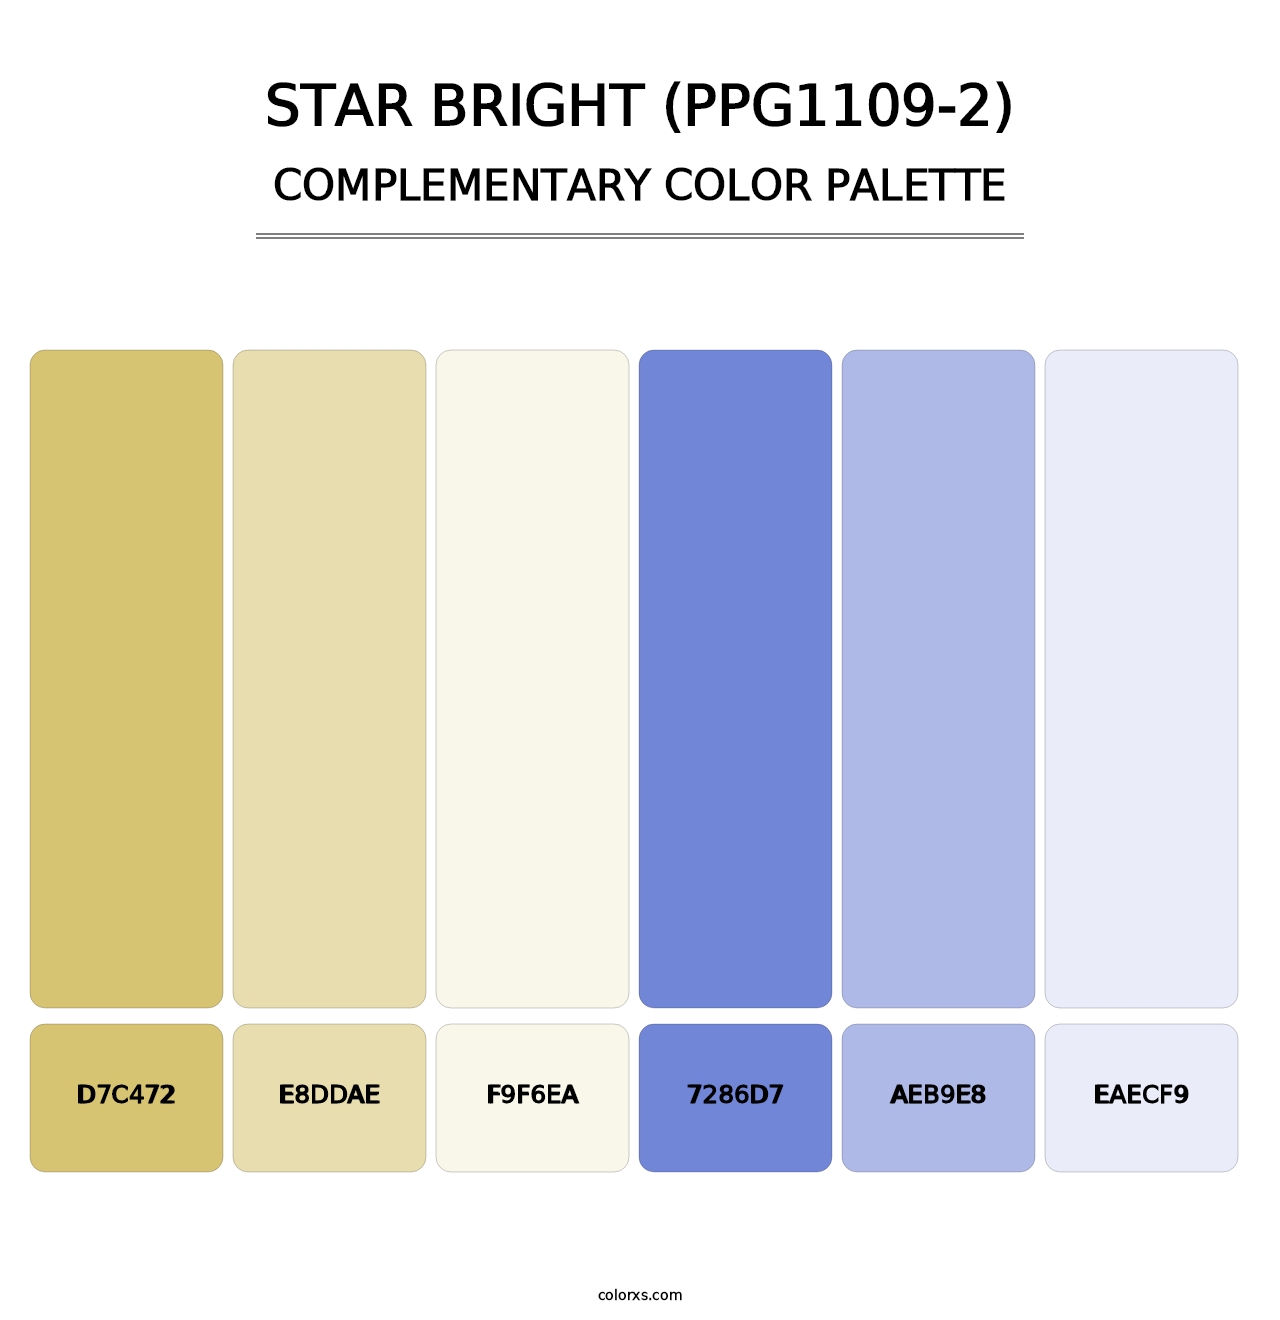 Star Bright (PPG1109-2) - Complementary Color Palette